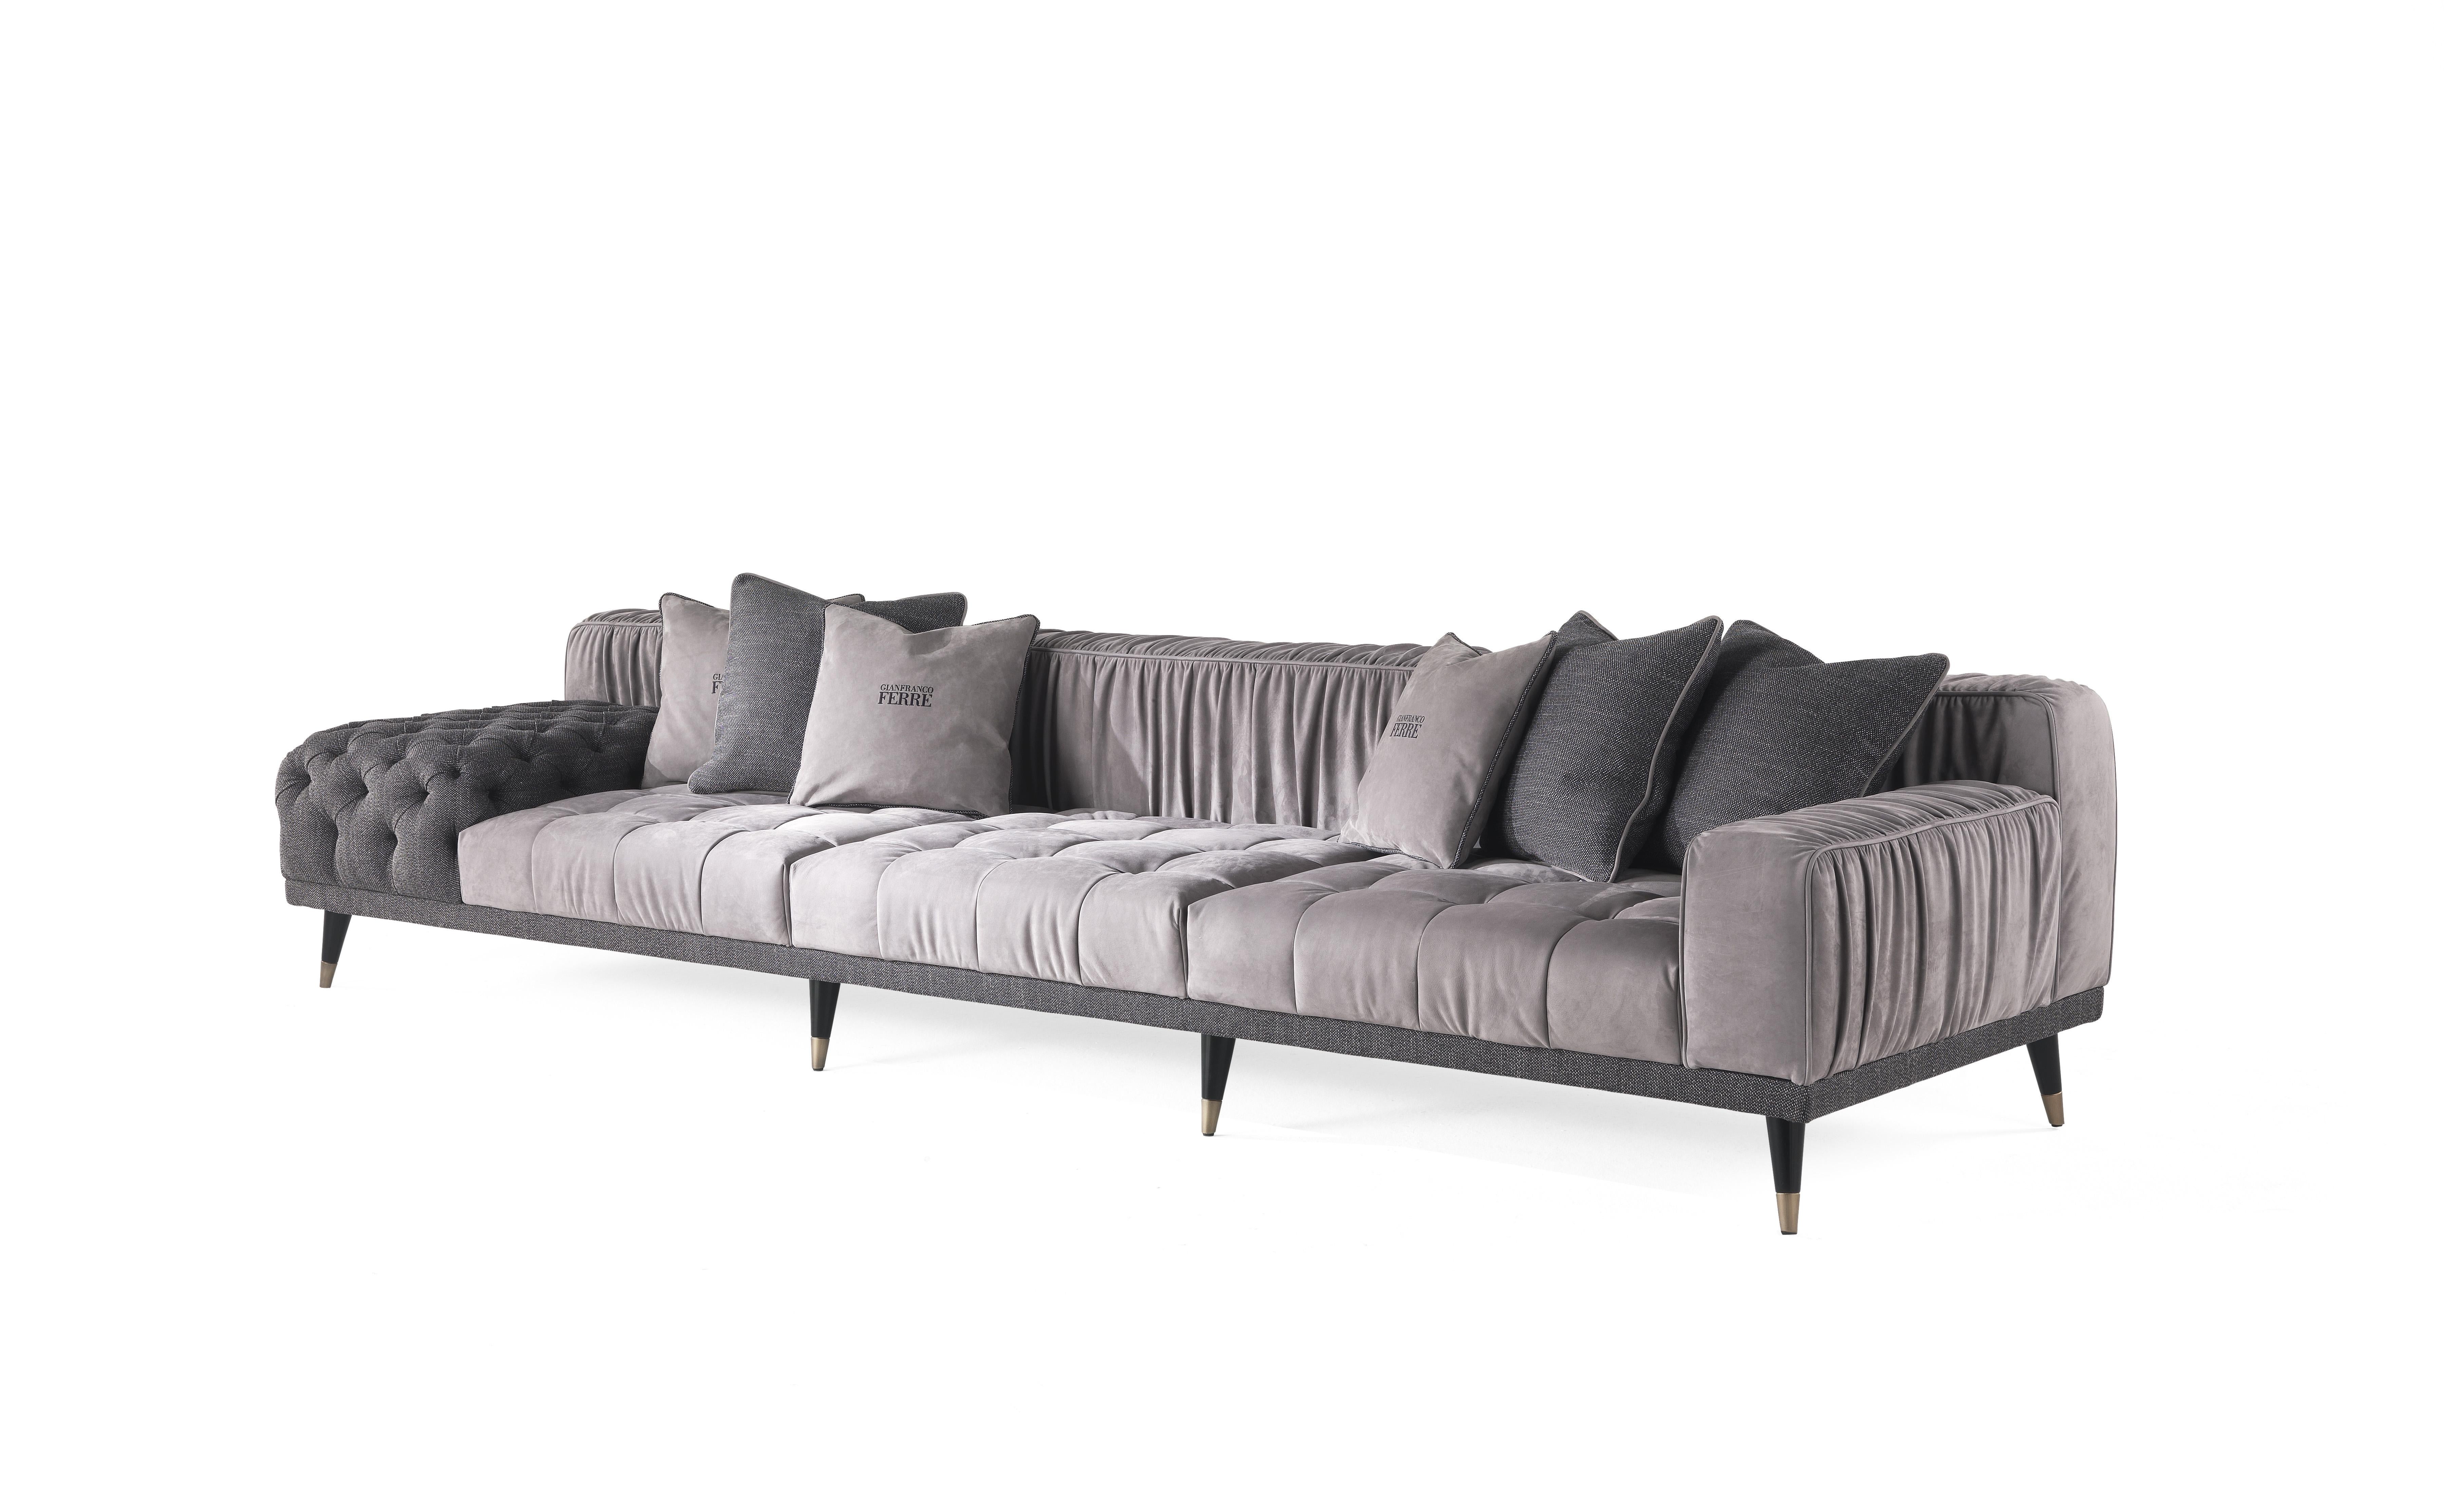 A sofa with a bold personality that combines essential design, contemporary lines and a high level of craftsmanship. The alternation between different finishings, with capitonné parts and pleating on the back creates a unique and refined set that